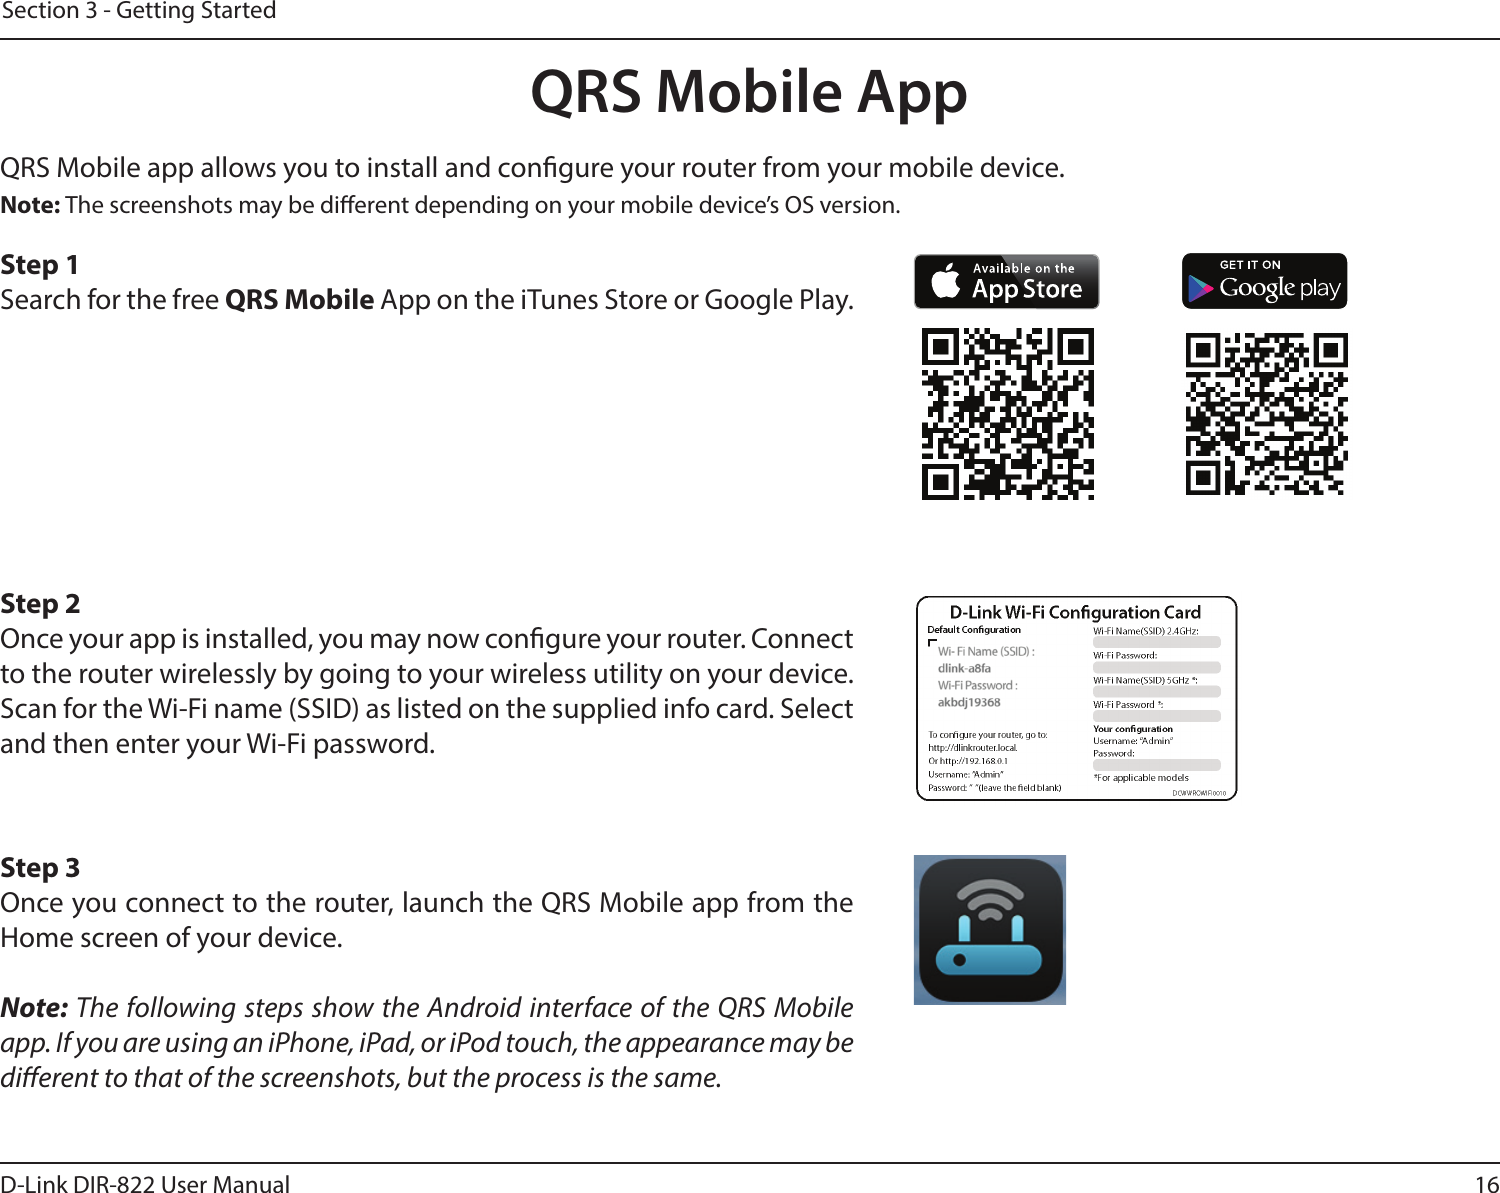 16D-Link DIR-822 User ManualSection 3 - Getting StartedQRS Mobile AppQRS Mobile app allows you to install and congure your router from your mobile device. Step 1Search for the free QRS Mobile App on the iTunes Store or Google Play.Step 2Once your app is installed, you may now congure your router. Connect to the router wirelessly by going to your wireless utility on your device. Scan for the Wi-Fi name (SSID) as listed on the supplied info card. Select and then enter your Wi-Fi password.Step 3Once you connect to the router, launch the QRS Mobile app from the Home screen of your device.Note: The following steps show the Android interface of the QRS Mobile app. If you are using an iPhone, iPad, or iPod touch, the appearance may be dierent to that of the screenshots, but the process is the same.Note: The screenshots may be dierent depending on your mobile device’s OS version.